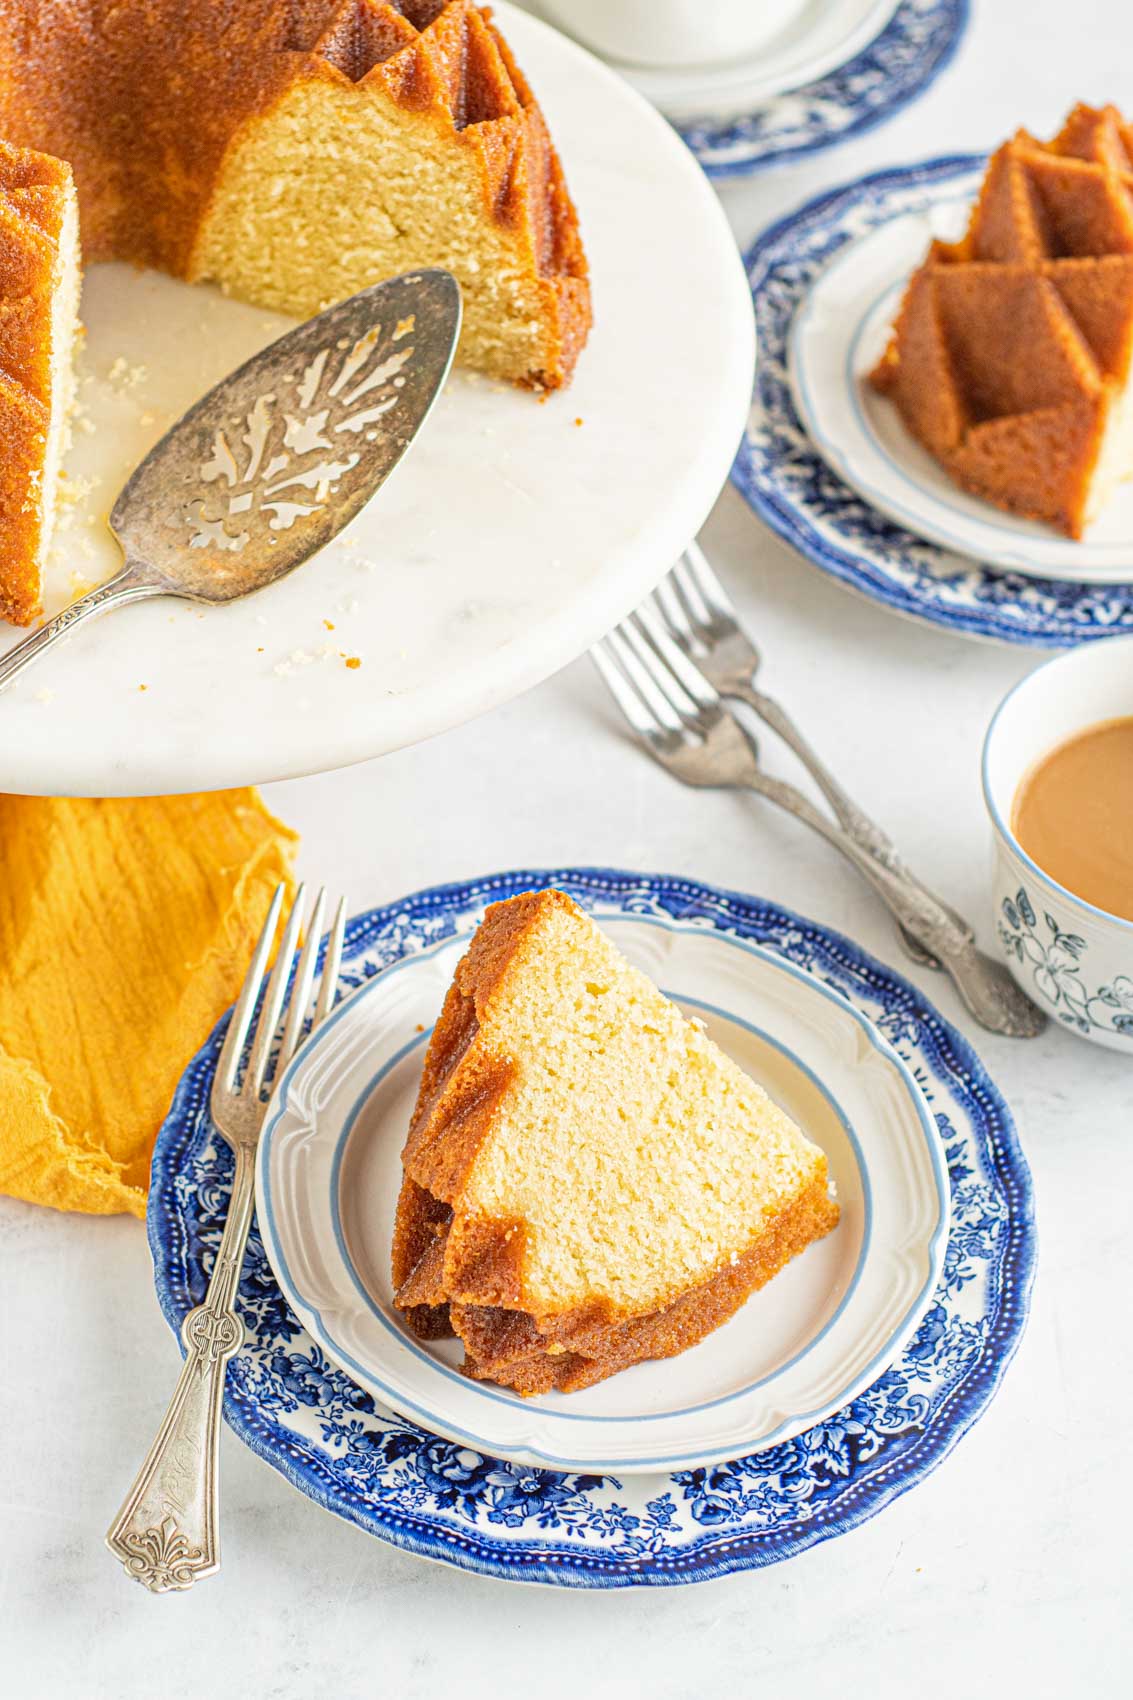 slice of Kentucky Butter Pound Cake on a blue plate next to a cake stand